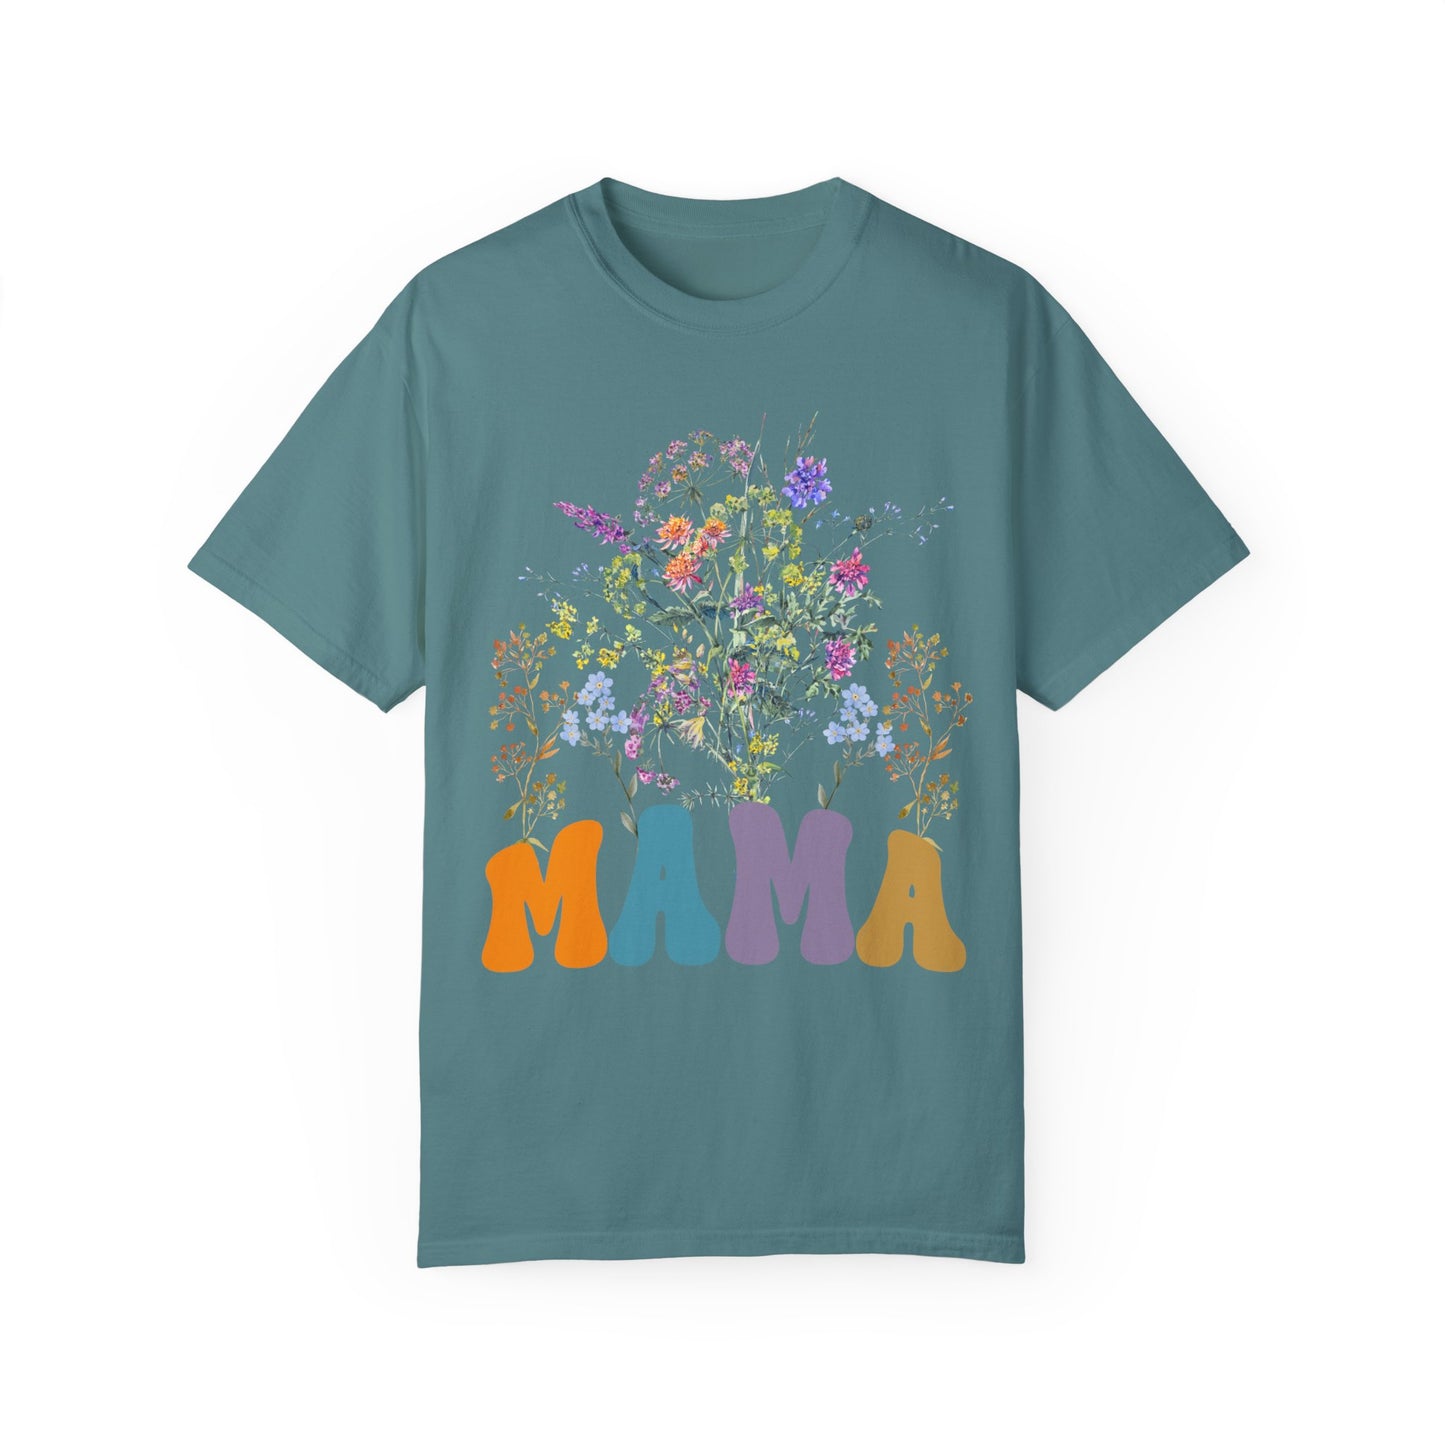 Wildflowers Mama Shirt, Retro Mom TShirt, Mother's Day Gift, Flower Shirts for Women, Floral New Mom Gift, Comfort Colors Shirt, CC1615